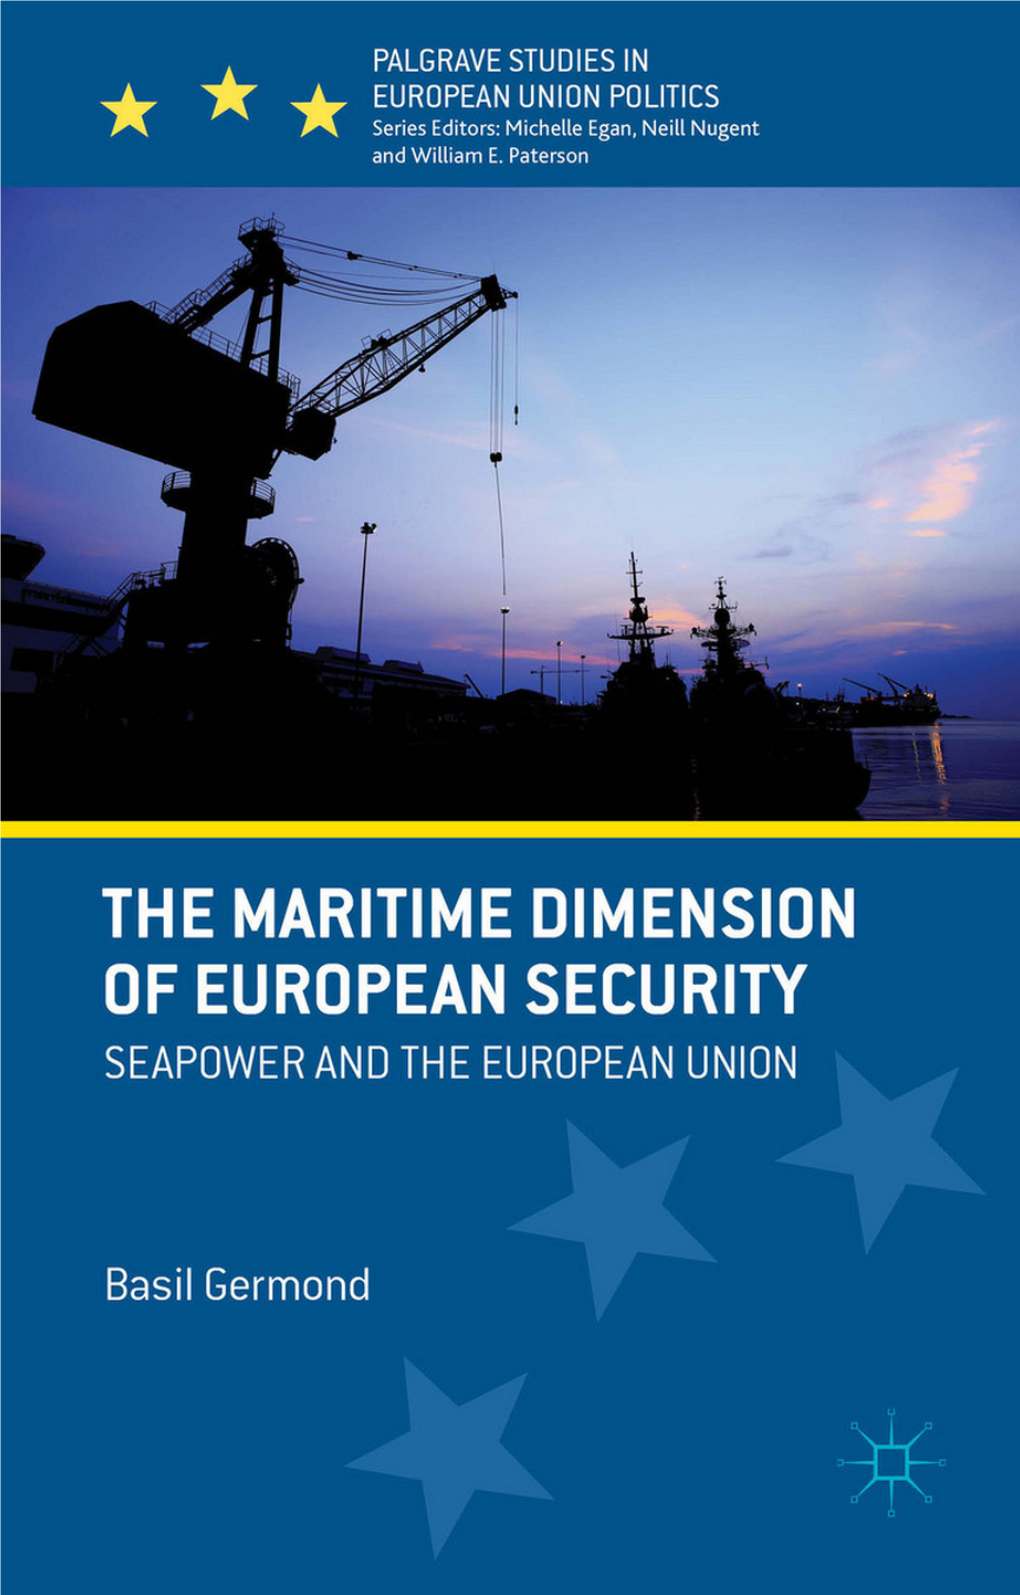 The Maritime Dimension of European Security Seapower and the European Union